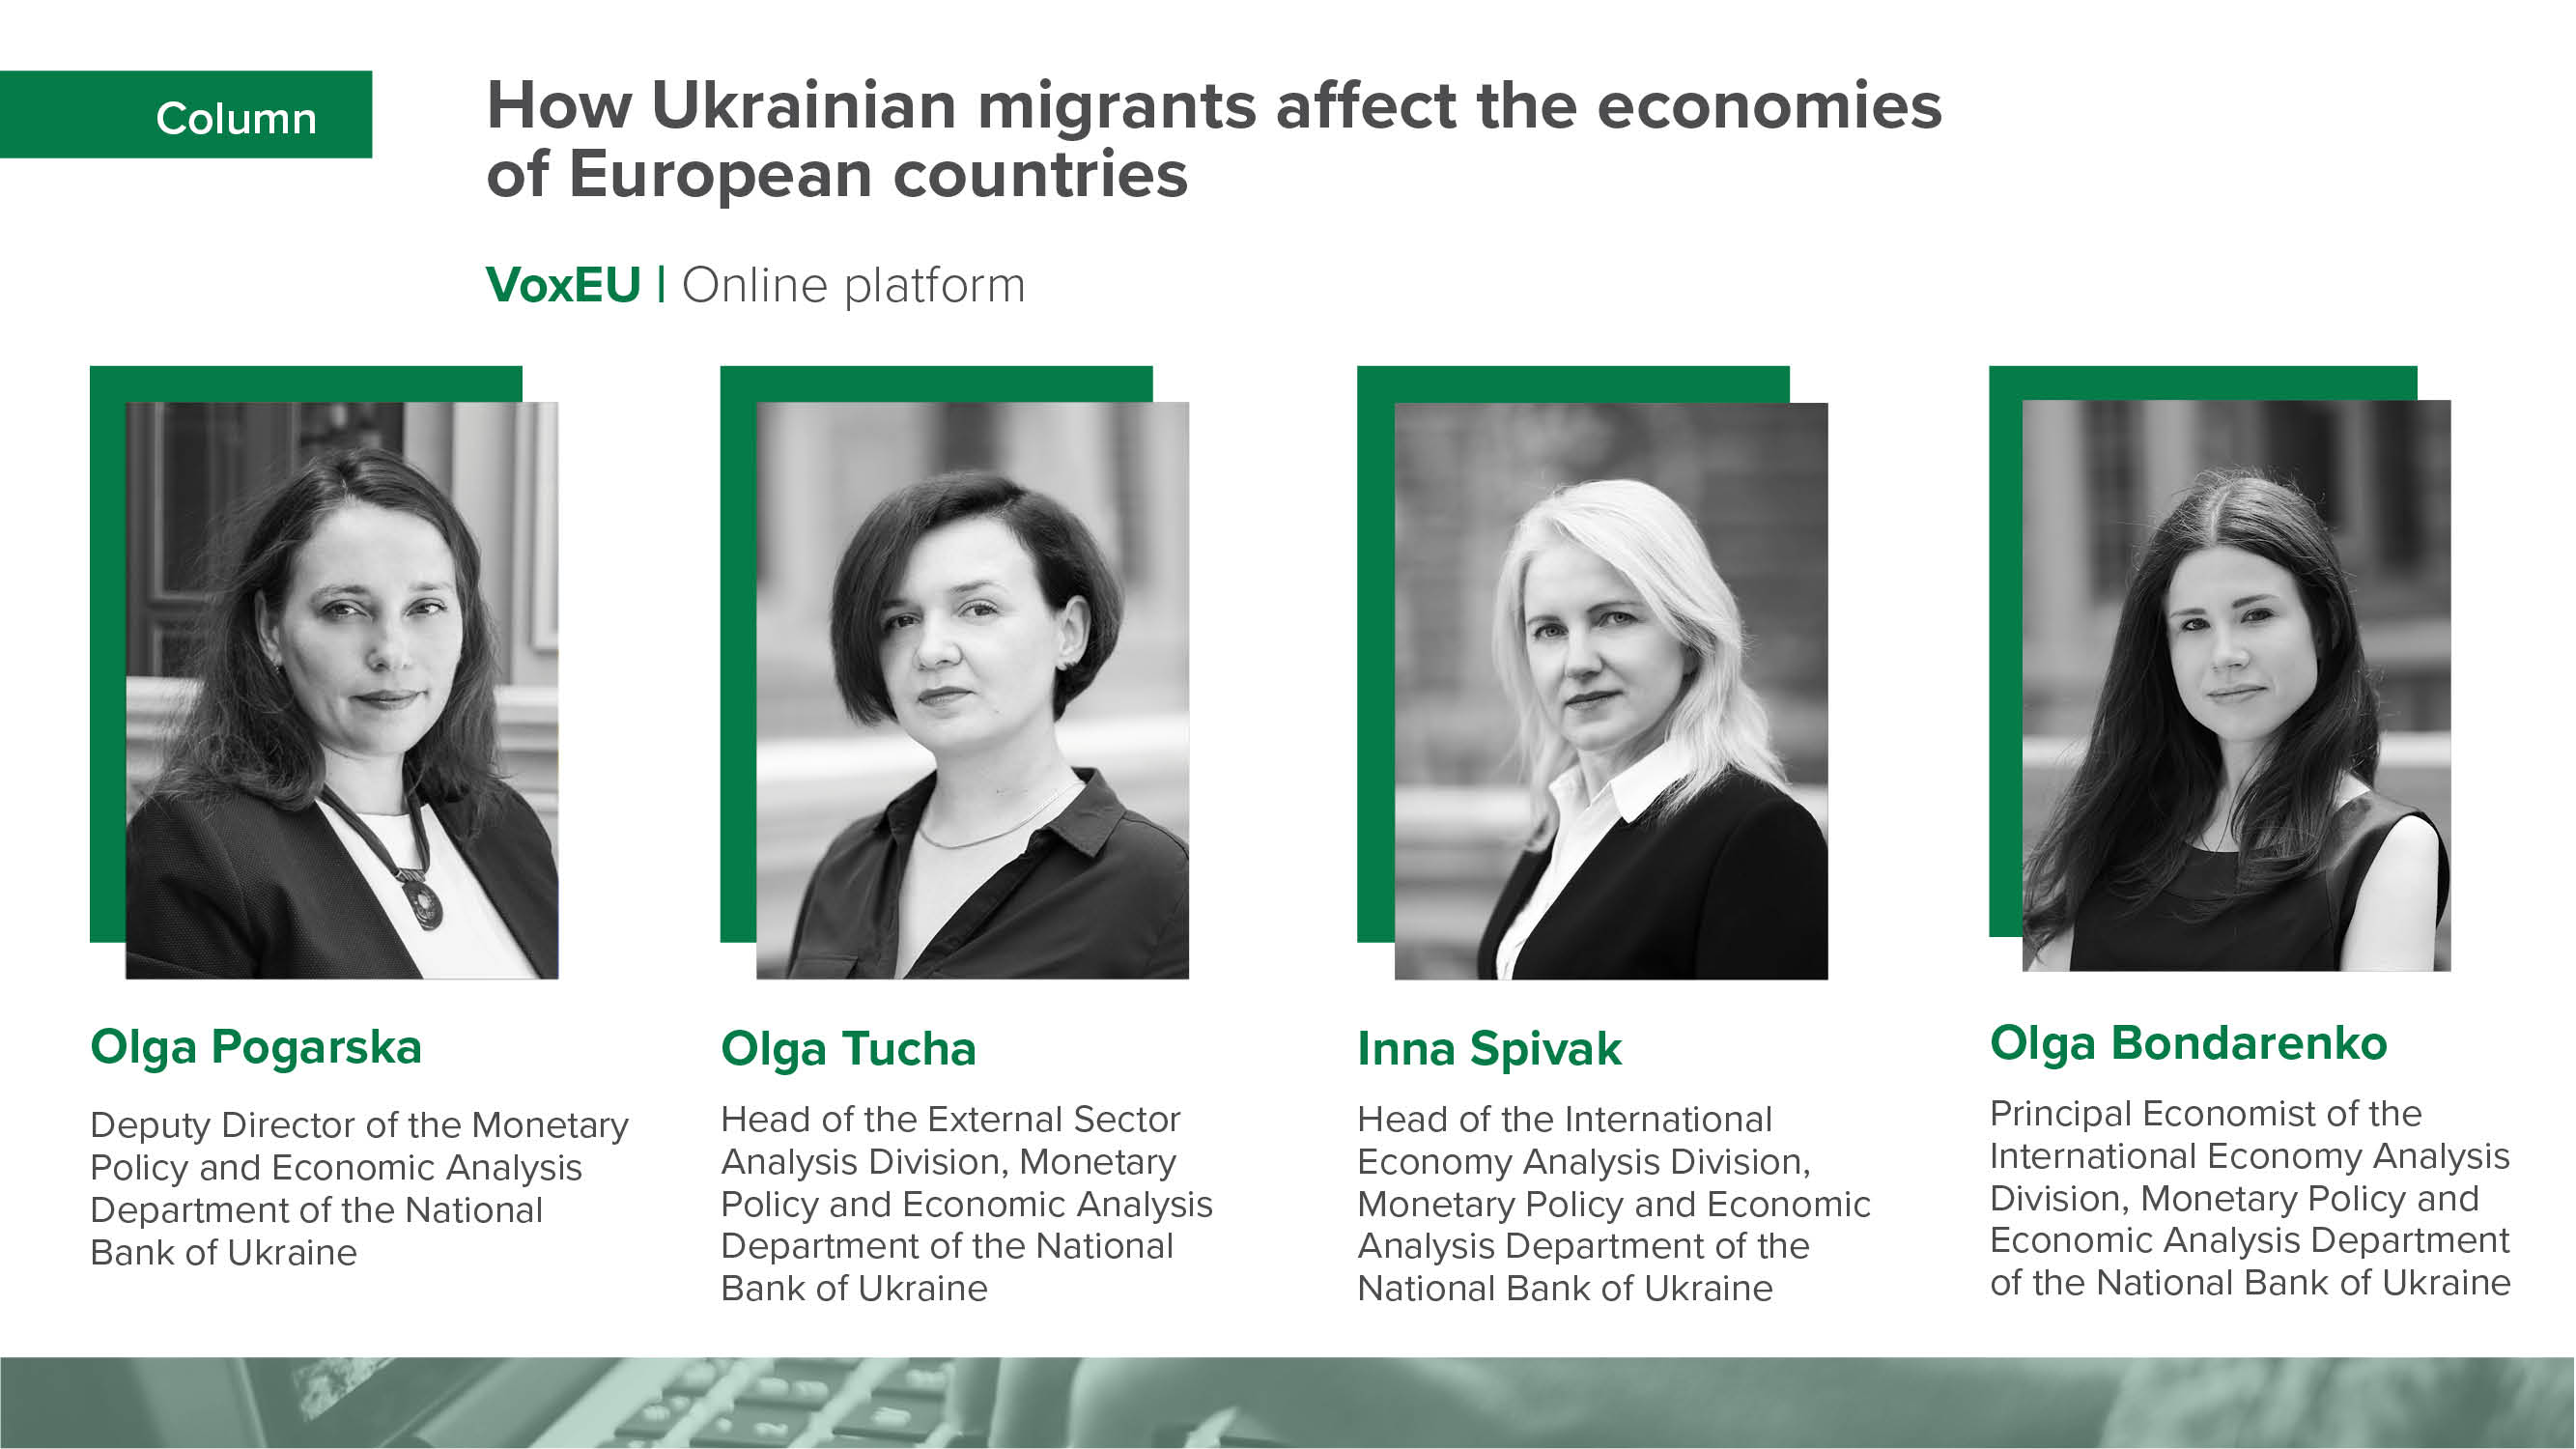 In VoxEU Column, Experts from NBU Monetary Policy and Economic Analysis Department Discuss Impact of Forced Migration from Ukraine on EU Economy